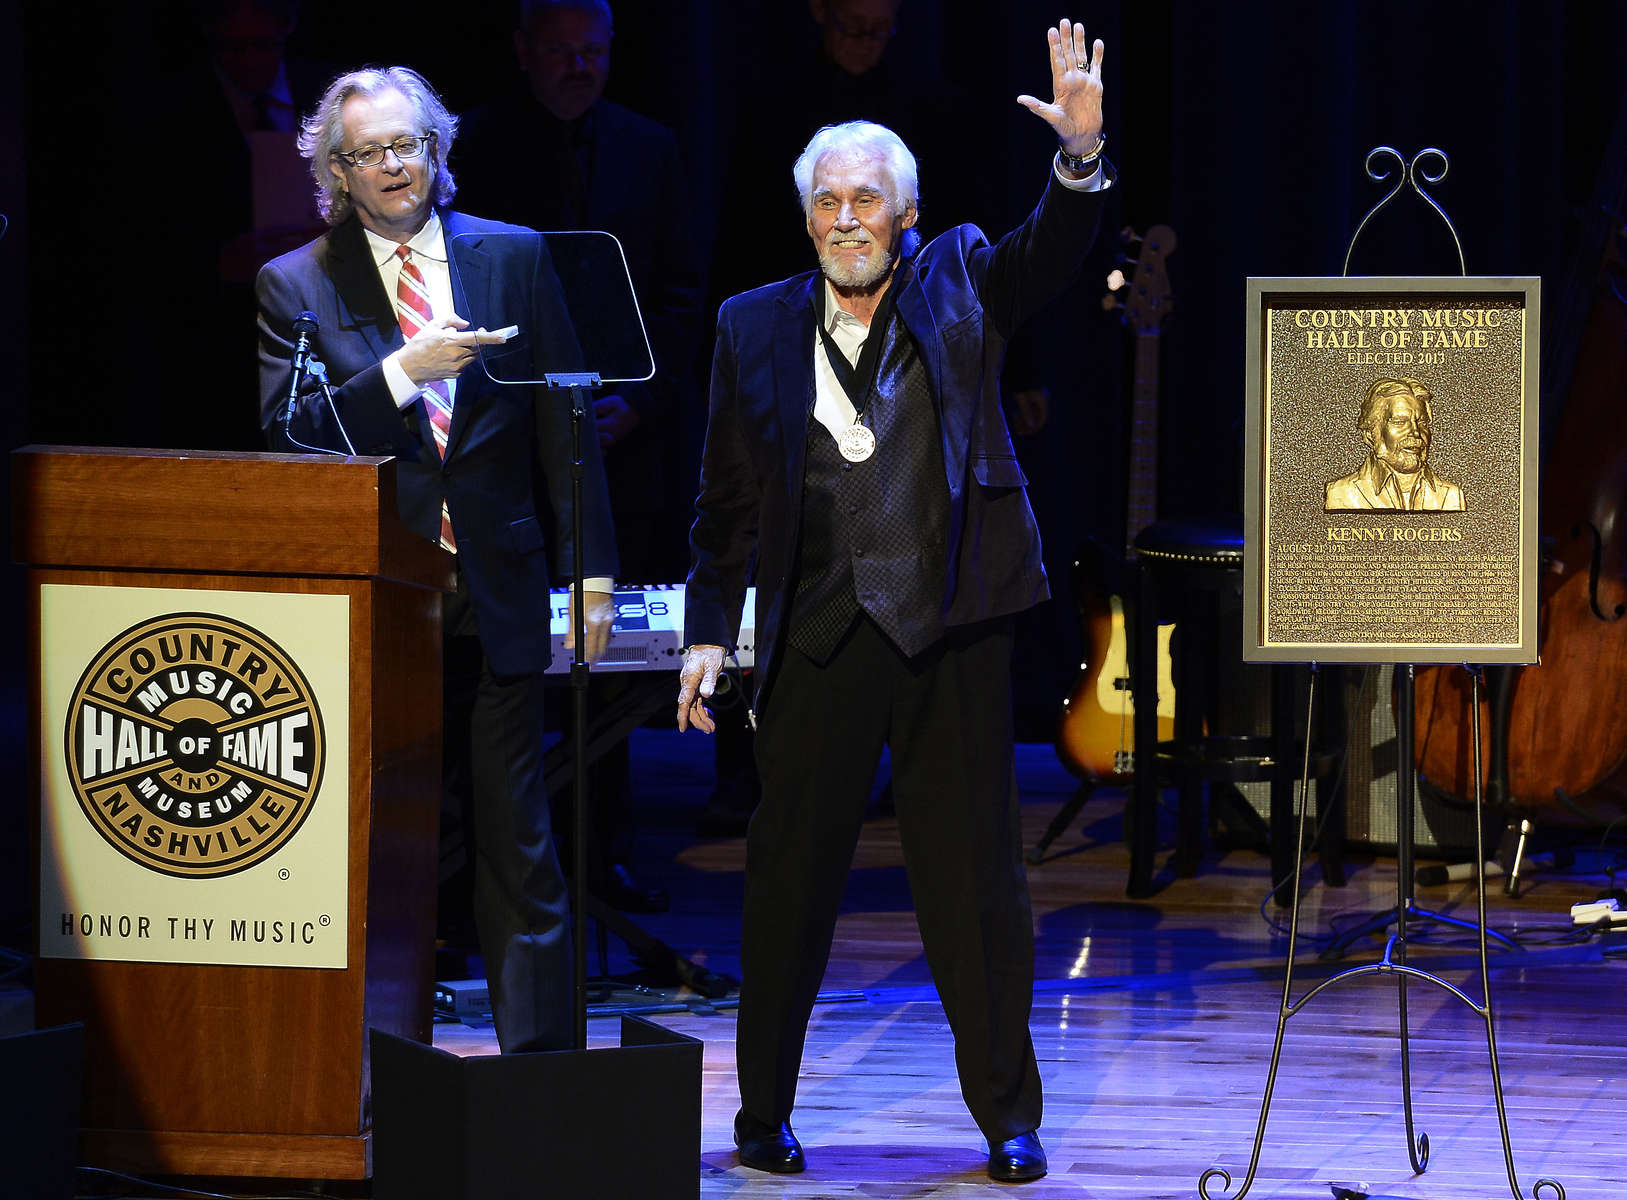 Country music star Kenny Rogers thanks the audienceat the ceremony for the 2013 inductions into the Country Music Hall of Fame in Nashville, Tenn. The inductees are Bobby Bare, the late “Cowboy” Jack Clement and Kenny Rogers. (AP Photo/ Mark Zaleski)